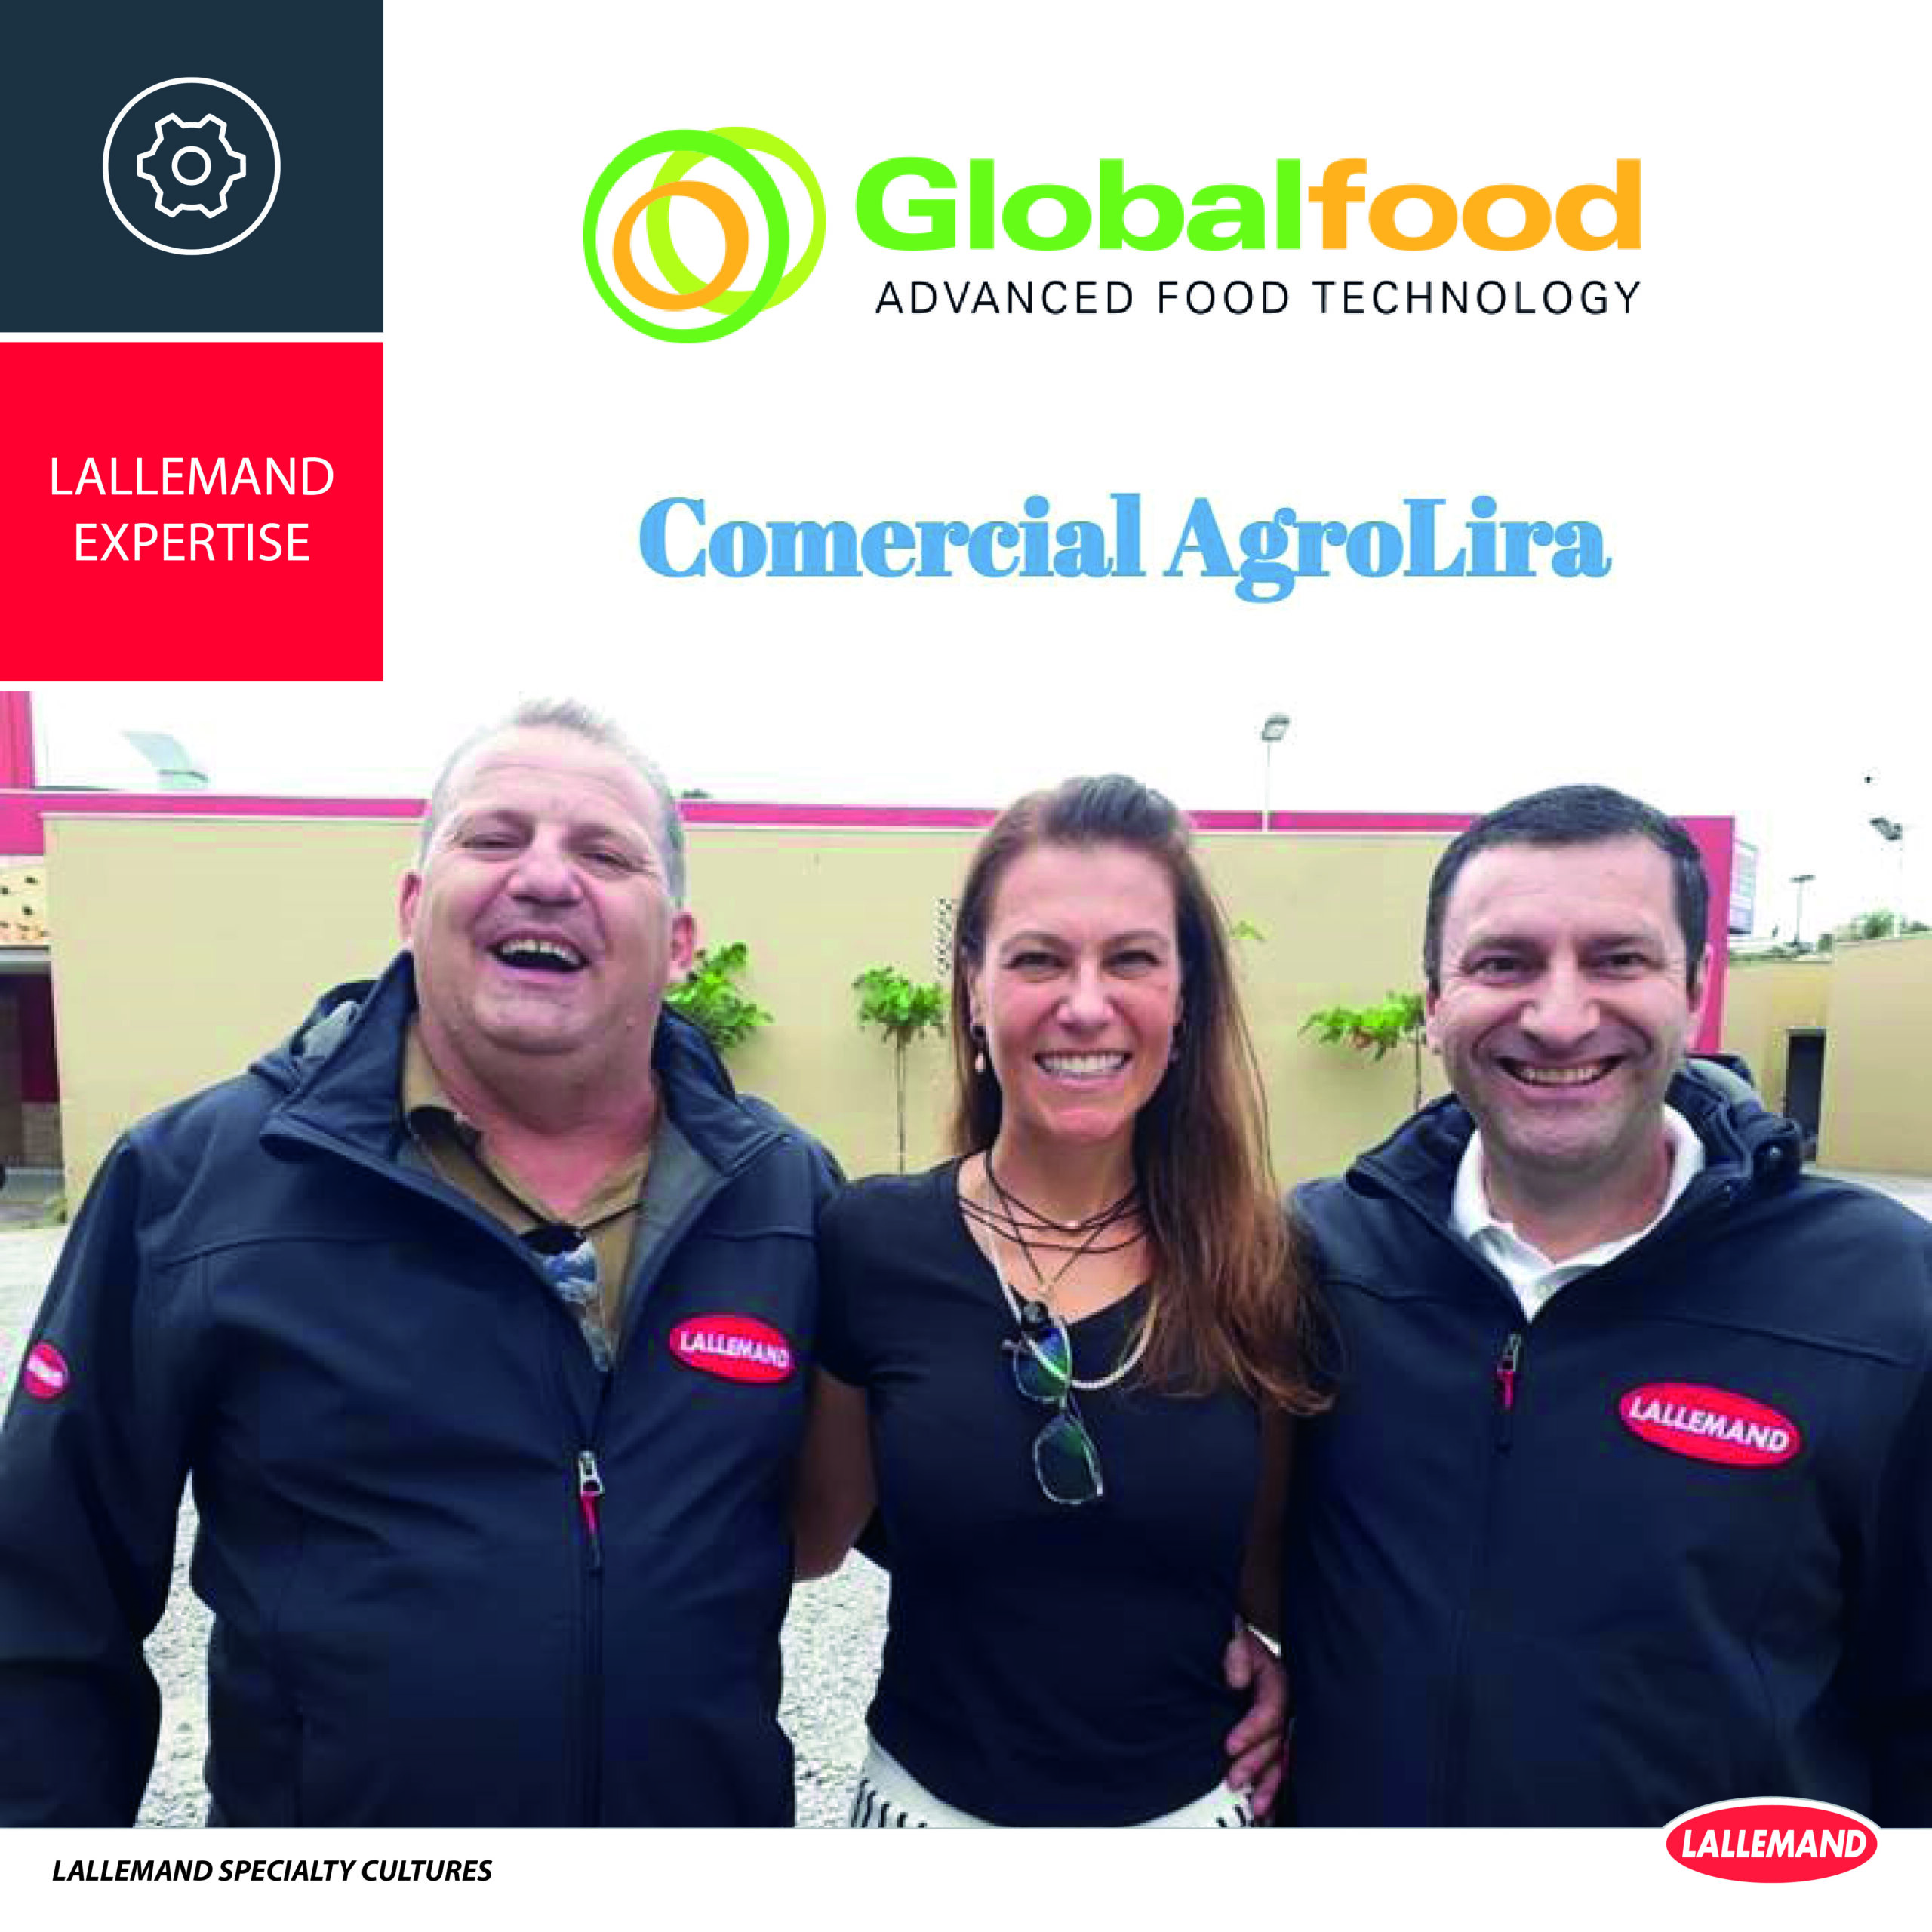 Globalfood Advanced Food Technology resellers